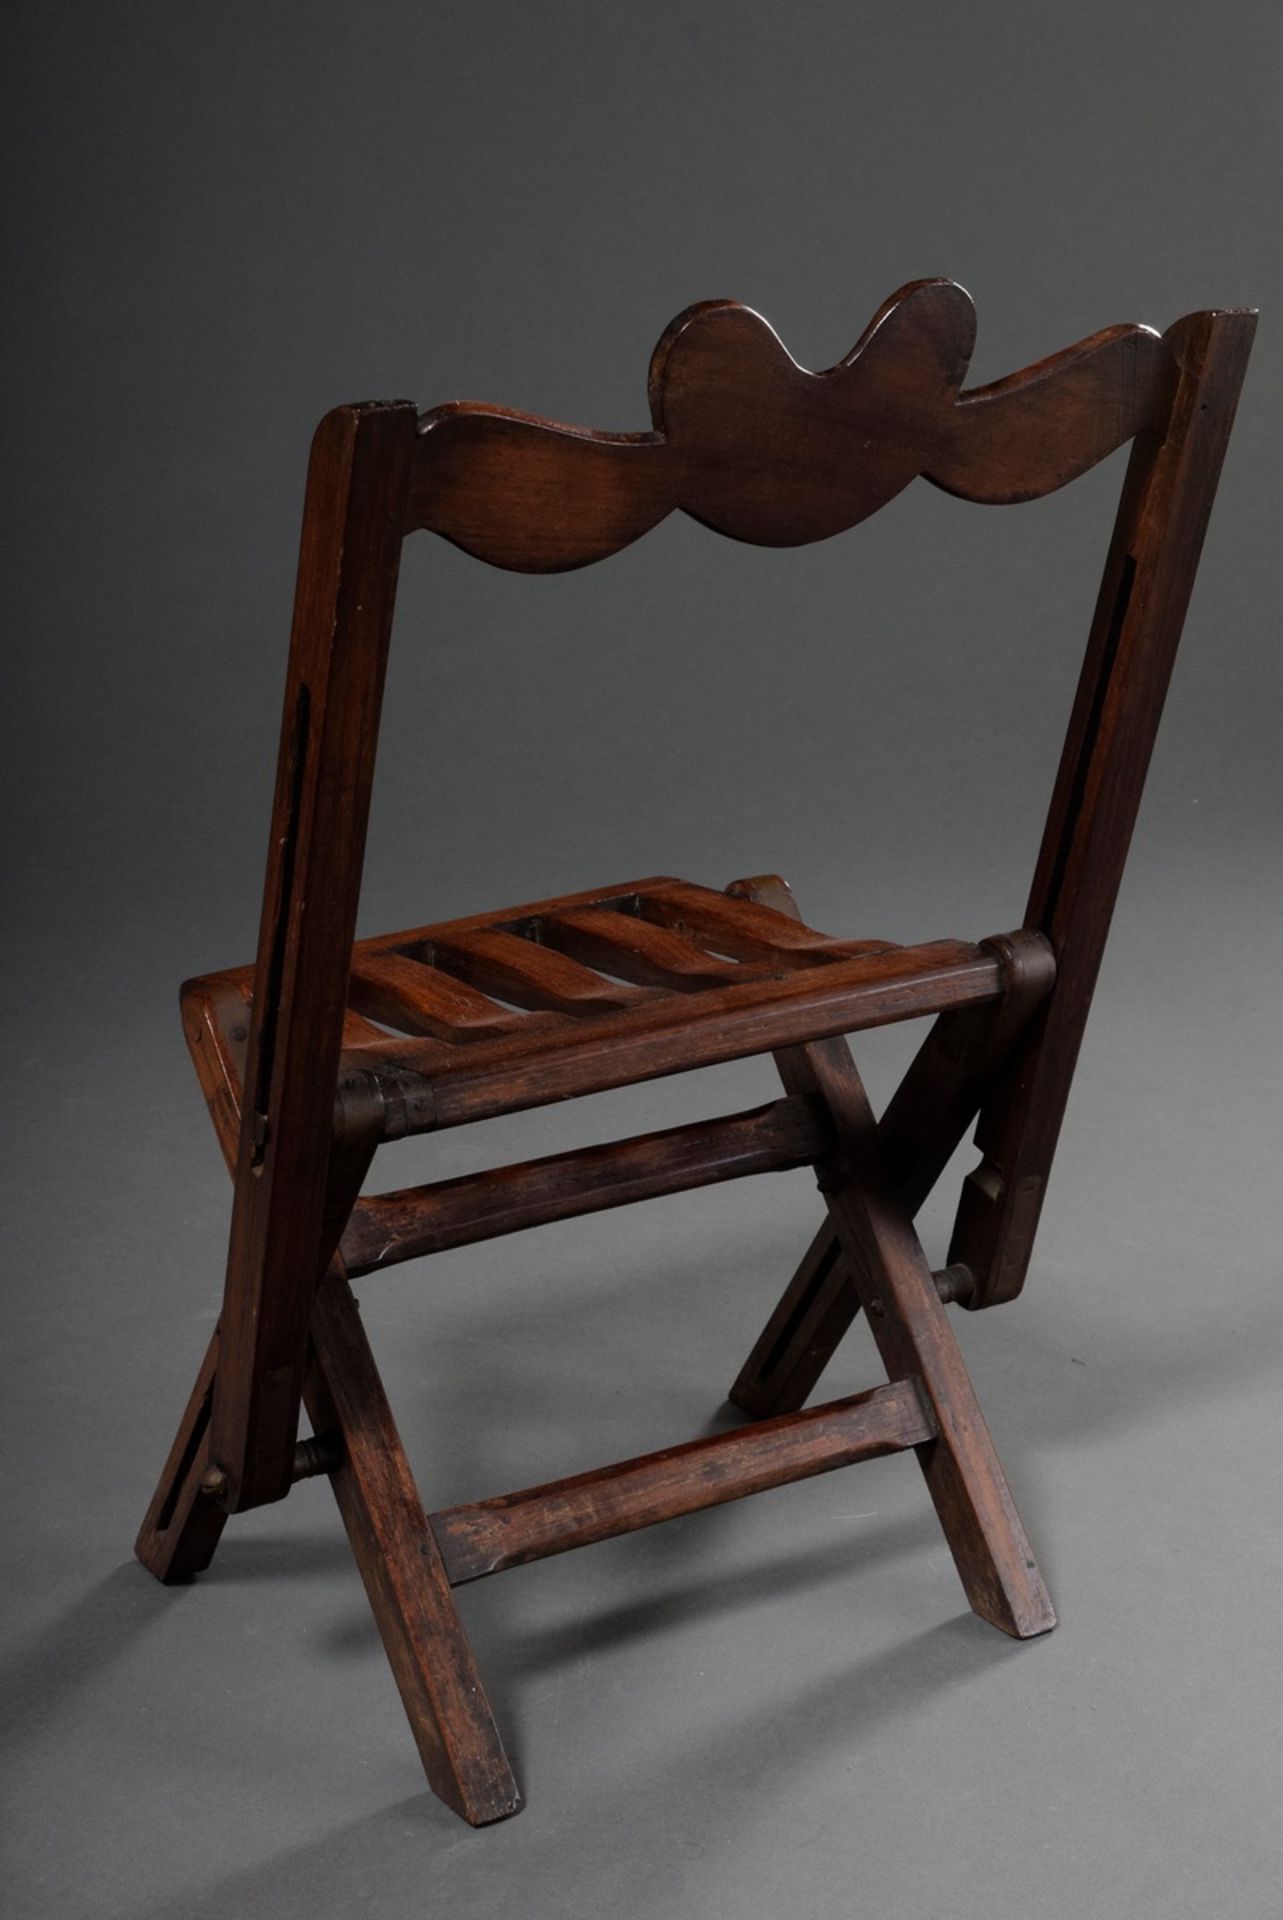 Children's folding chair, wood, h. 27/64cm, slight signs of use - Image 3 of 4